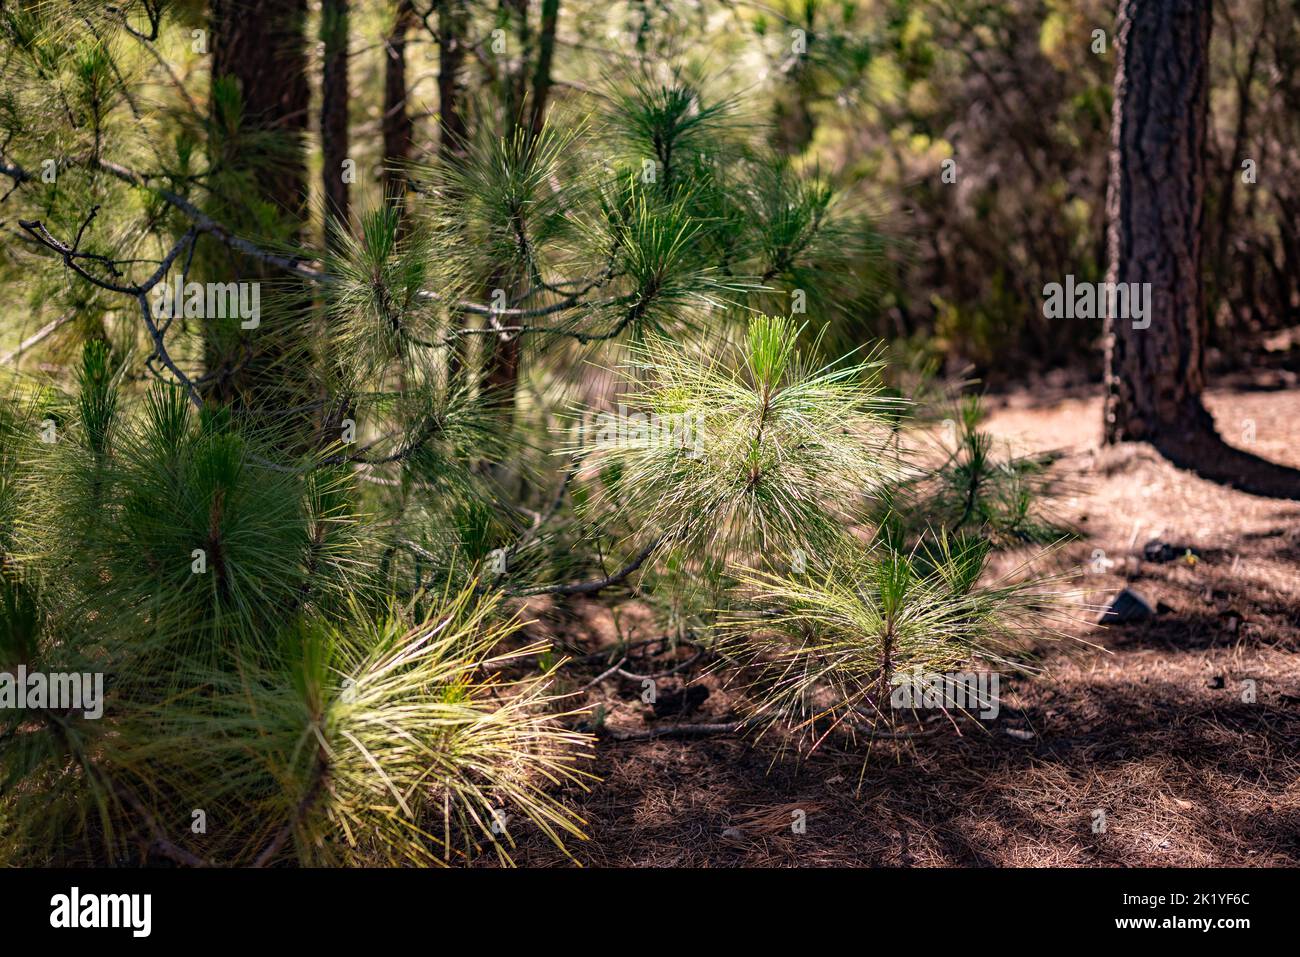 Pinus canariensis or the Canary Island pine young shoots background Stock Photo